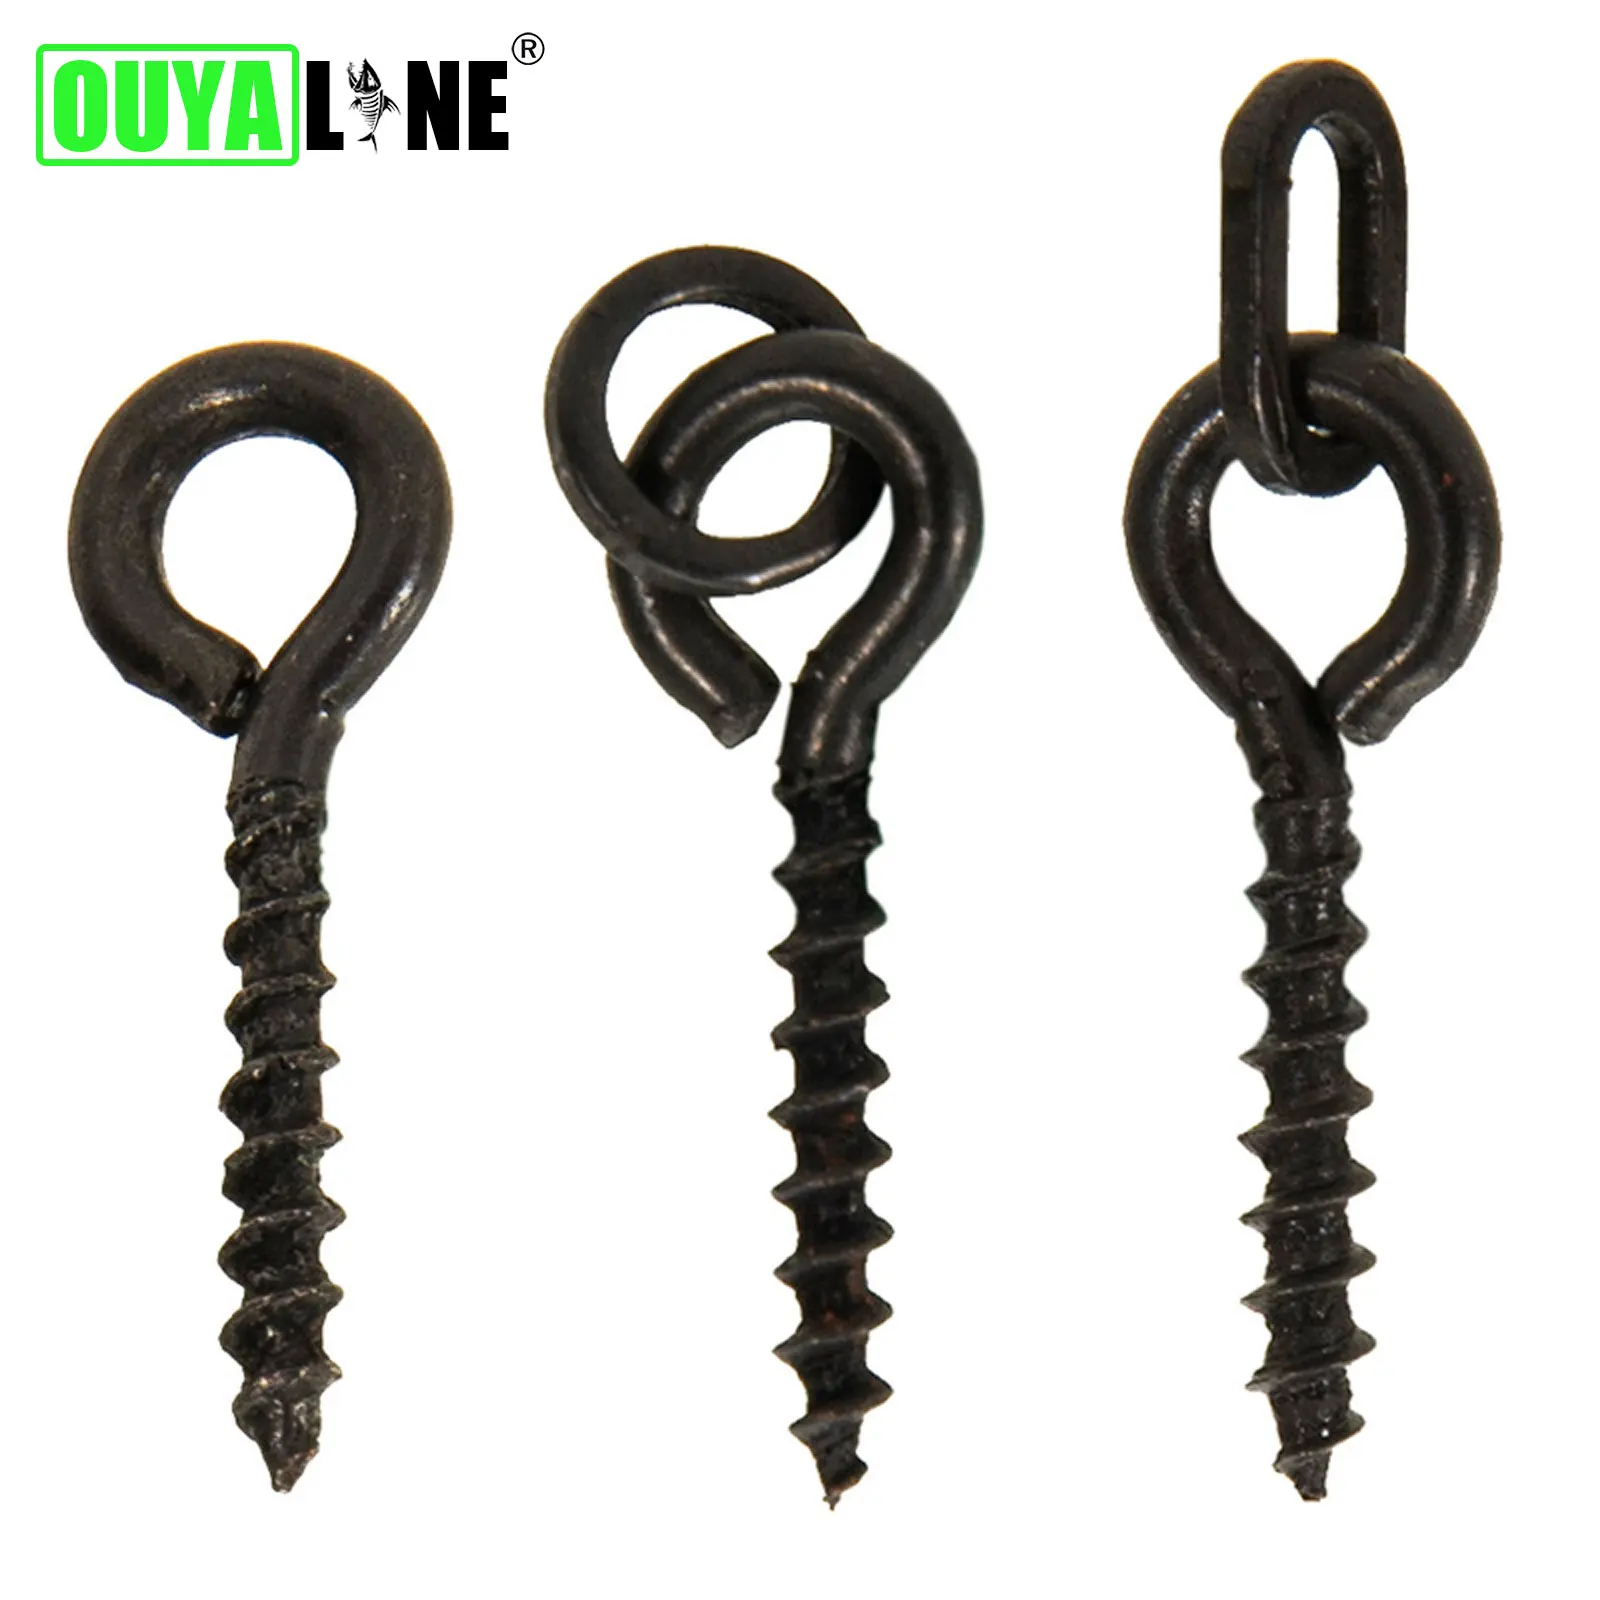 

New 50pcs Carp Fishing Accessories Screw Swivel For Ronnie Spinner Rig Boilies Fishing Hook Bait Casting Ronnie Carp Rigs Tackle